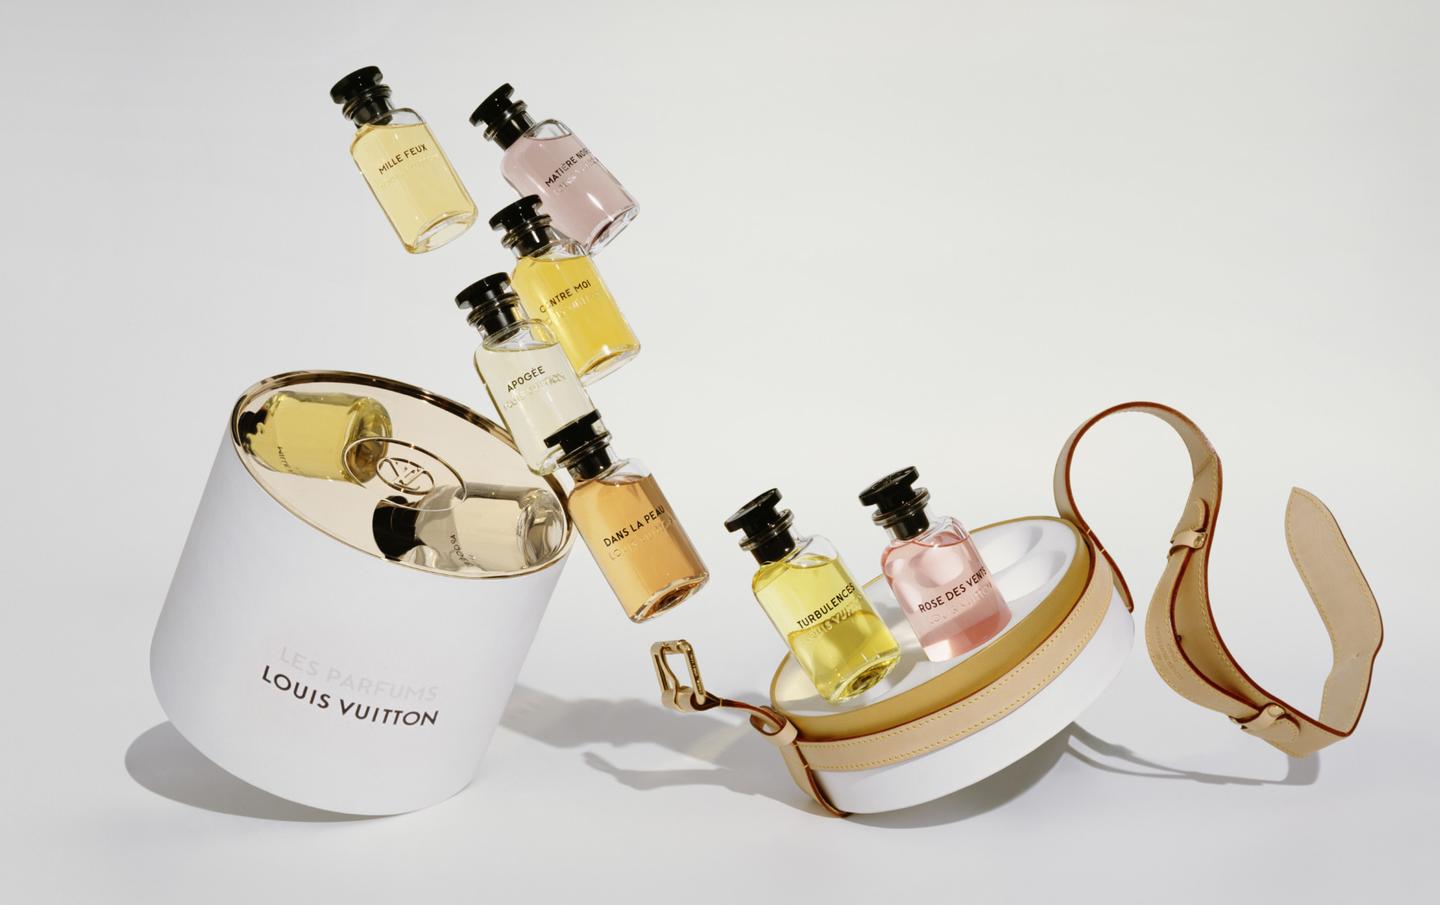 Louis Vuitton on X: Turning dreams into reality. Étoile Filante, the  newest #LouisVuitton women's fragrance carries within it the most universal  emotions, celebrating joy, hope and beauty in its purest form. Discover